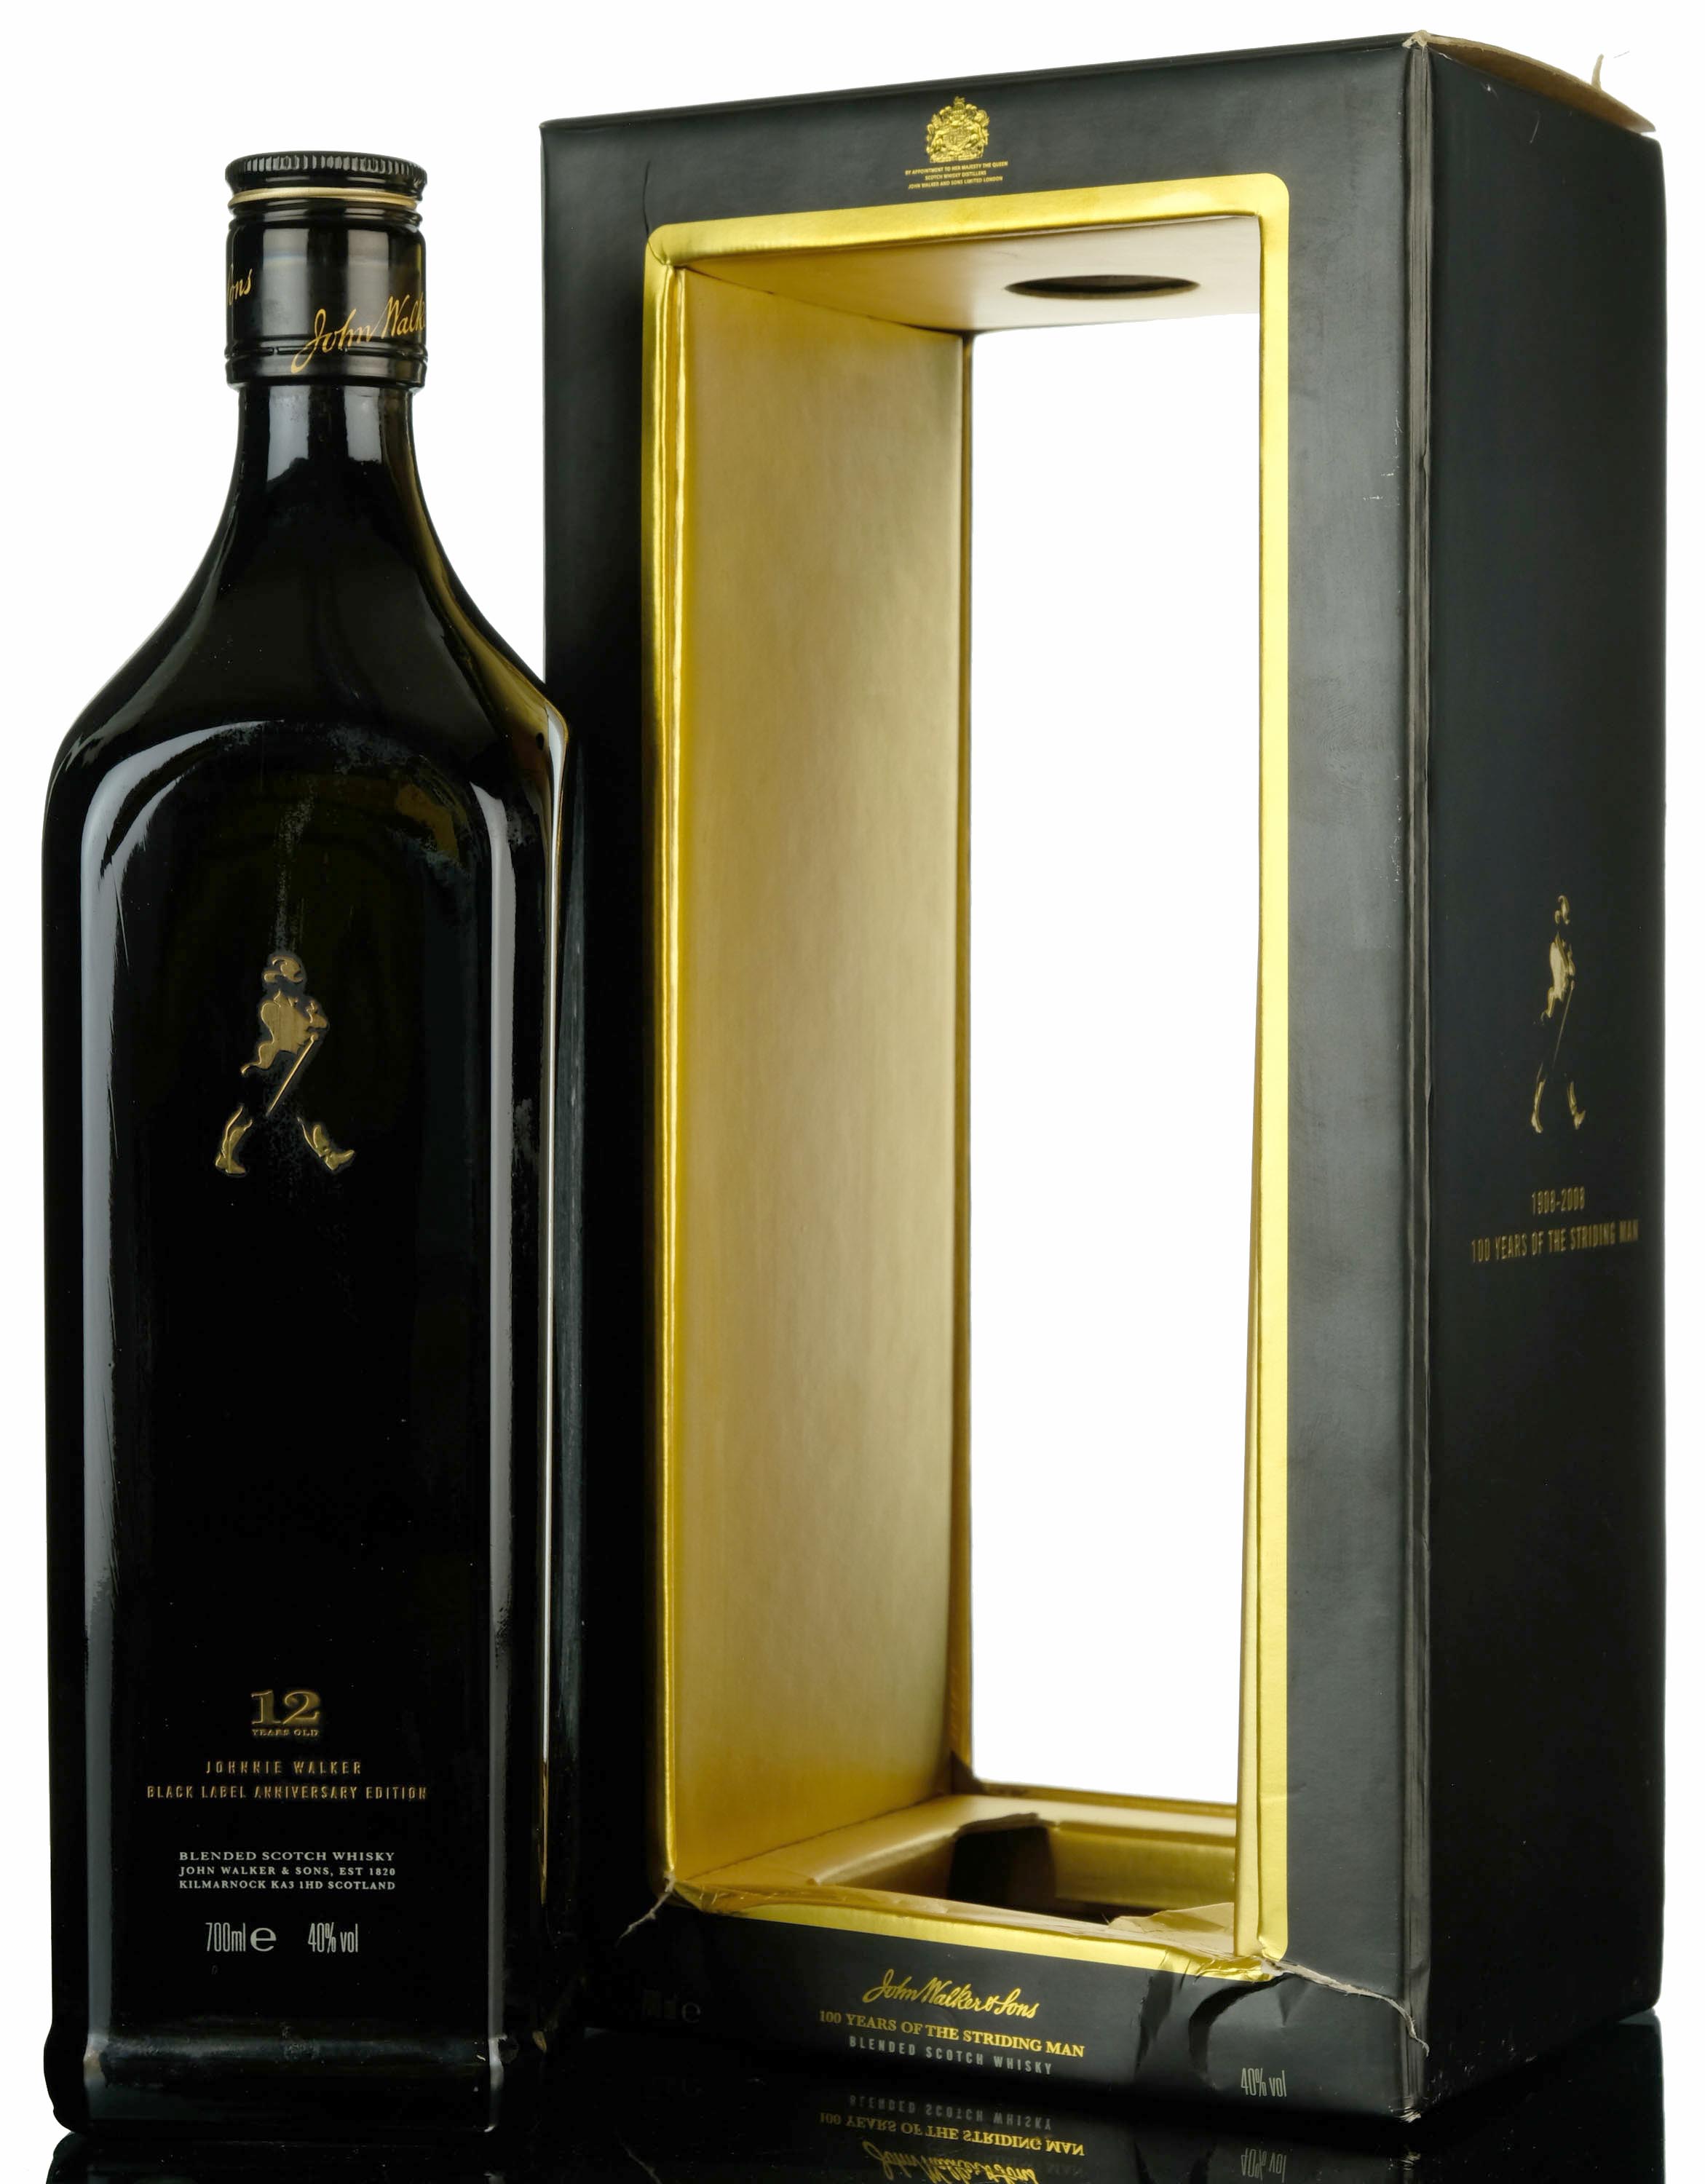 Johnnie Walker 12 Year Old - Black Label - Centenary Of The Striding Man 1909-2009